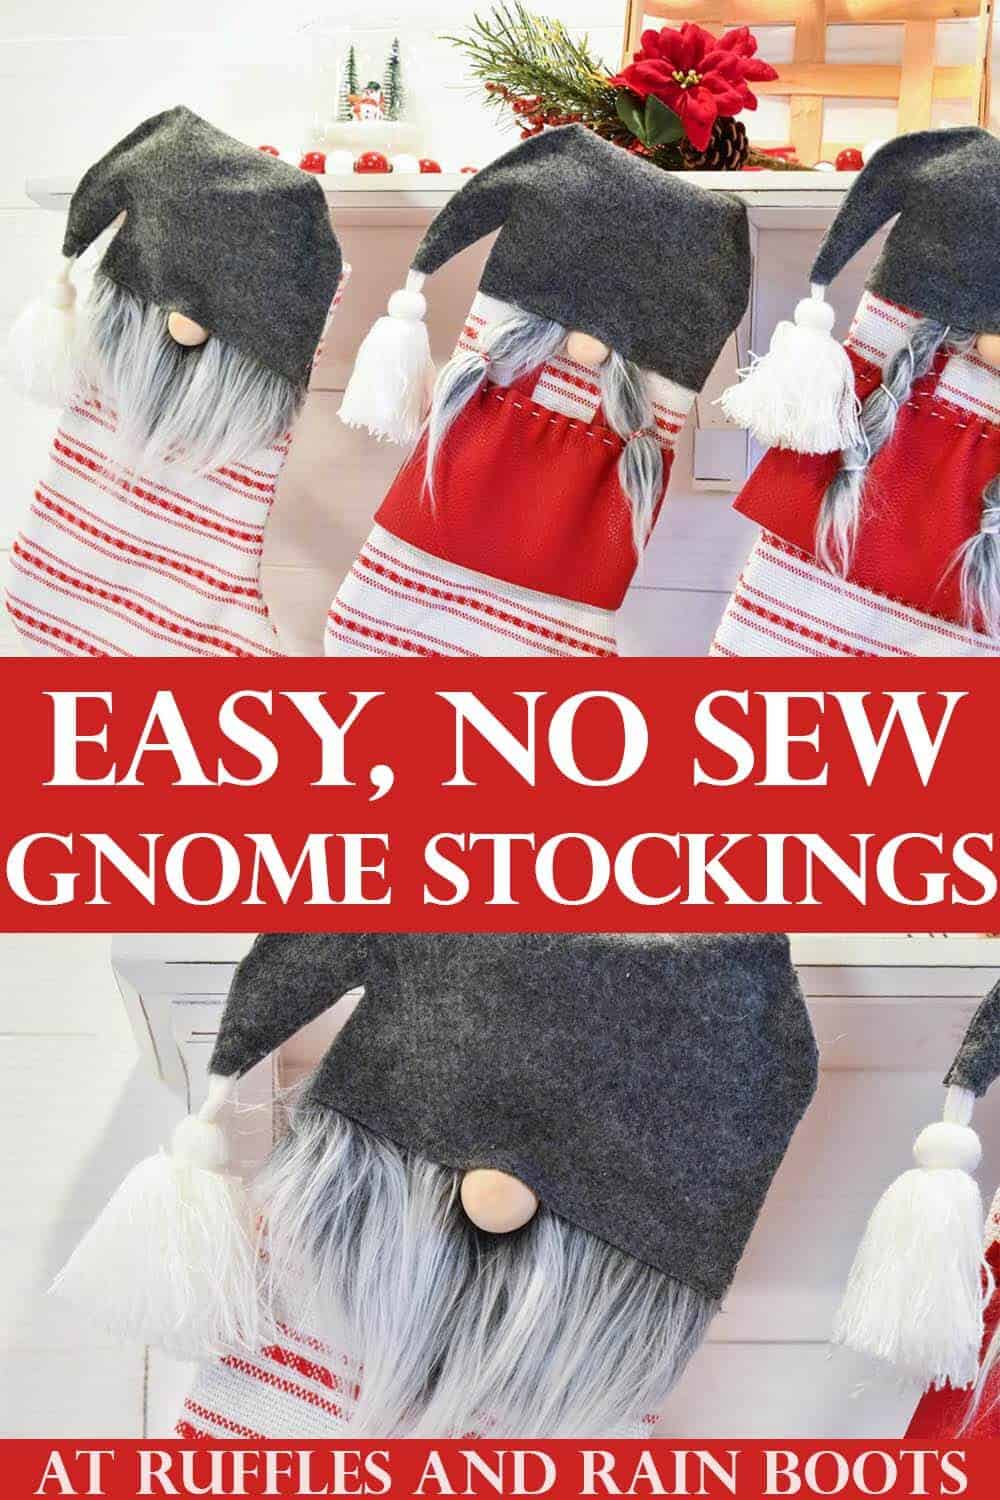 stacked image of three no sew gnome stockings hanging on white wall with Christmas background over a close up of boy gnome stocking with beard